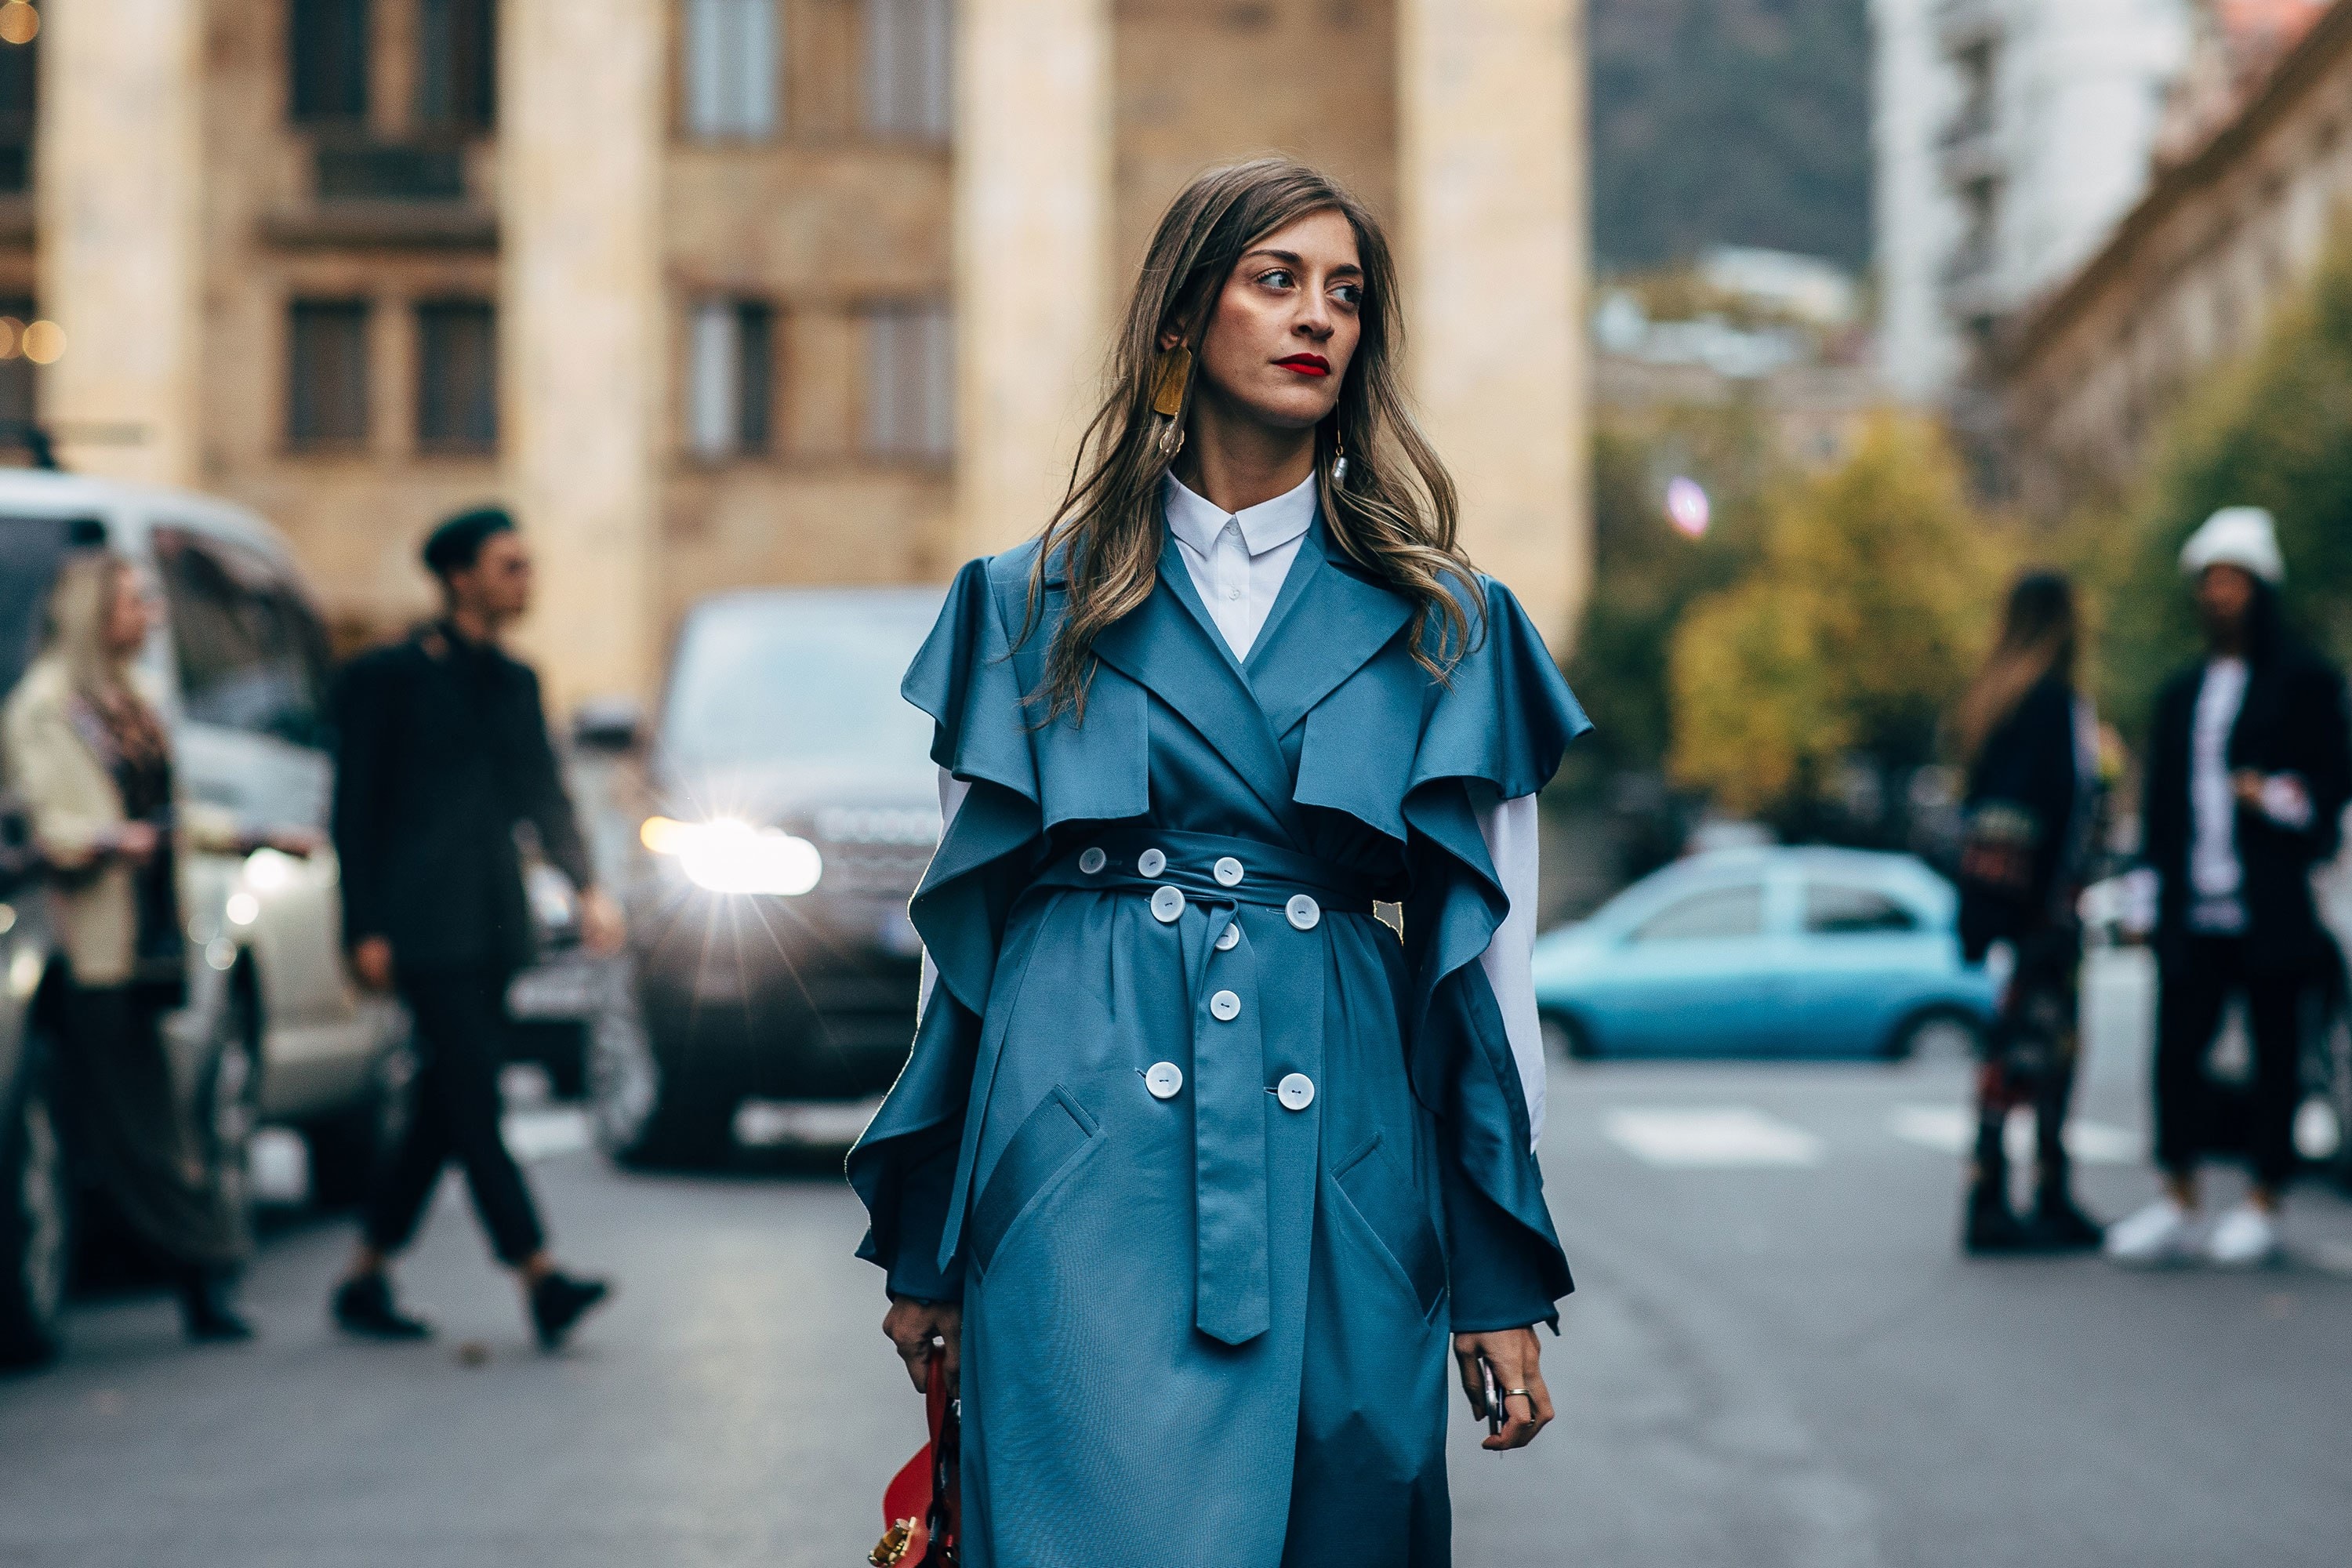 Trench Coat Street Style at Tbilisi Fashion Week Spring 2019